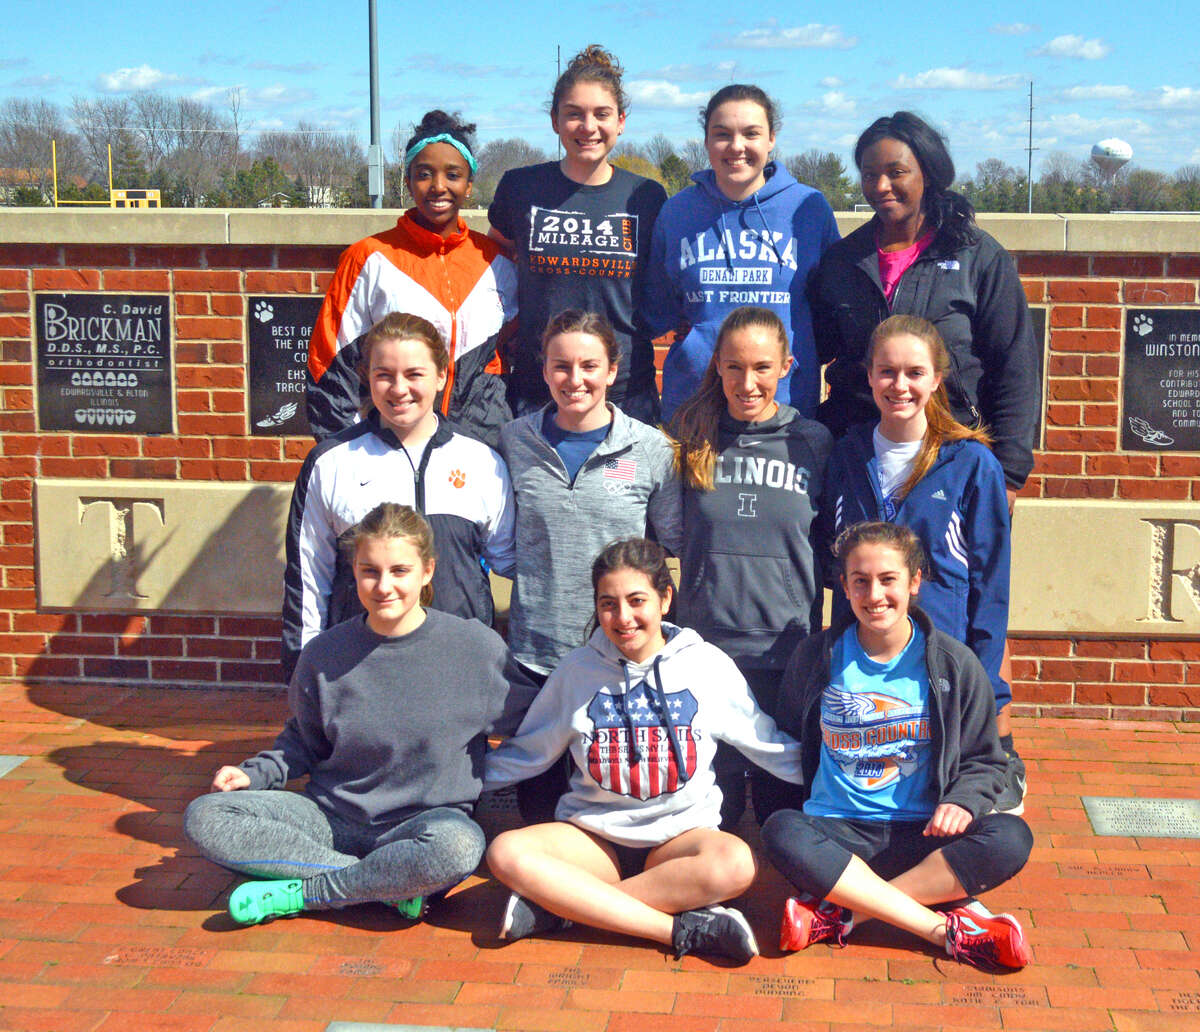 Seniors on the Edwardsville girls’ track and field team are, front row left to right, Ligita Ahele, Paola Minerva and Katelyn Singh. In the middle row, from left to right, are Haley Sparks, Lorie Cashdollar, Melissa Spencer and Kennison Adams. In the back row, from left to right, are Sheyenne Daughrity, Haley Allard, Alyssa Johnson and Natori Hodges. Natalee Woolf, Dahlia Nelson and Uranbaigali Bayarjargal are not pictured.